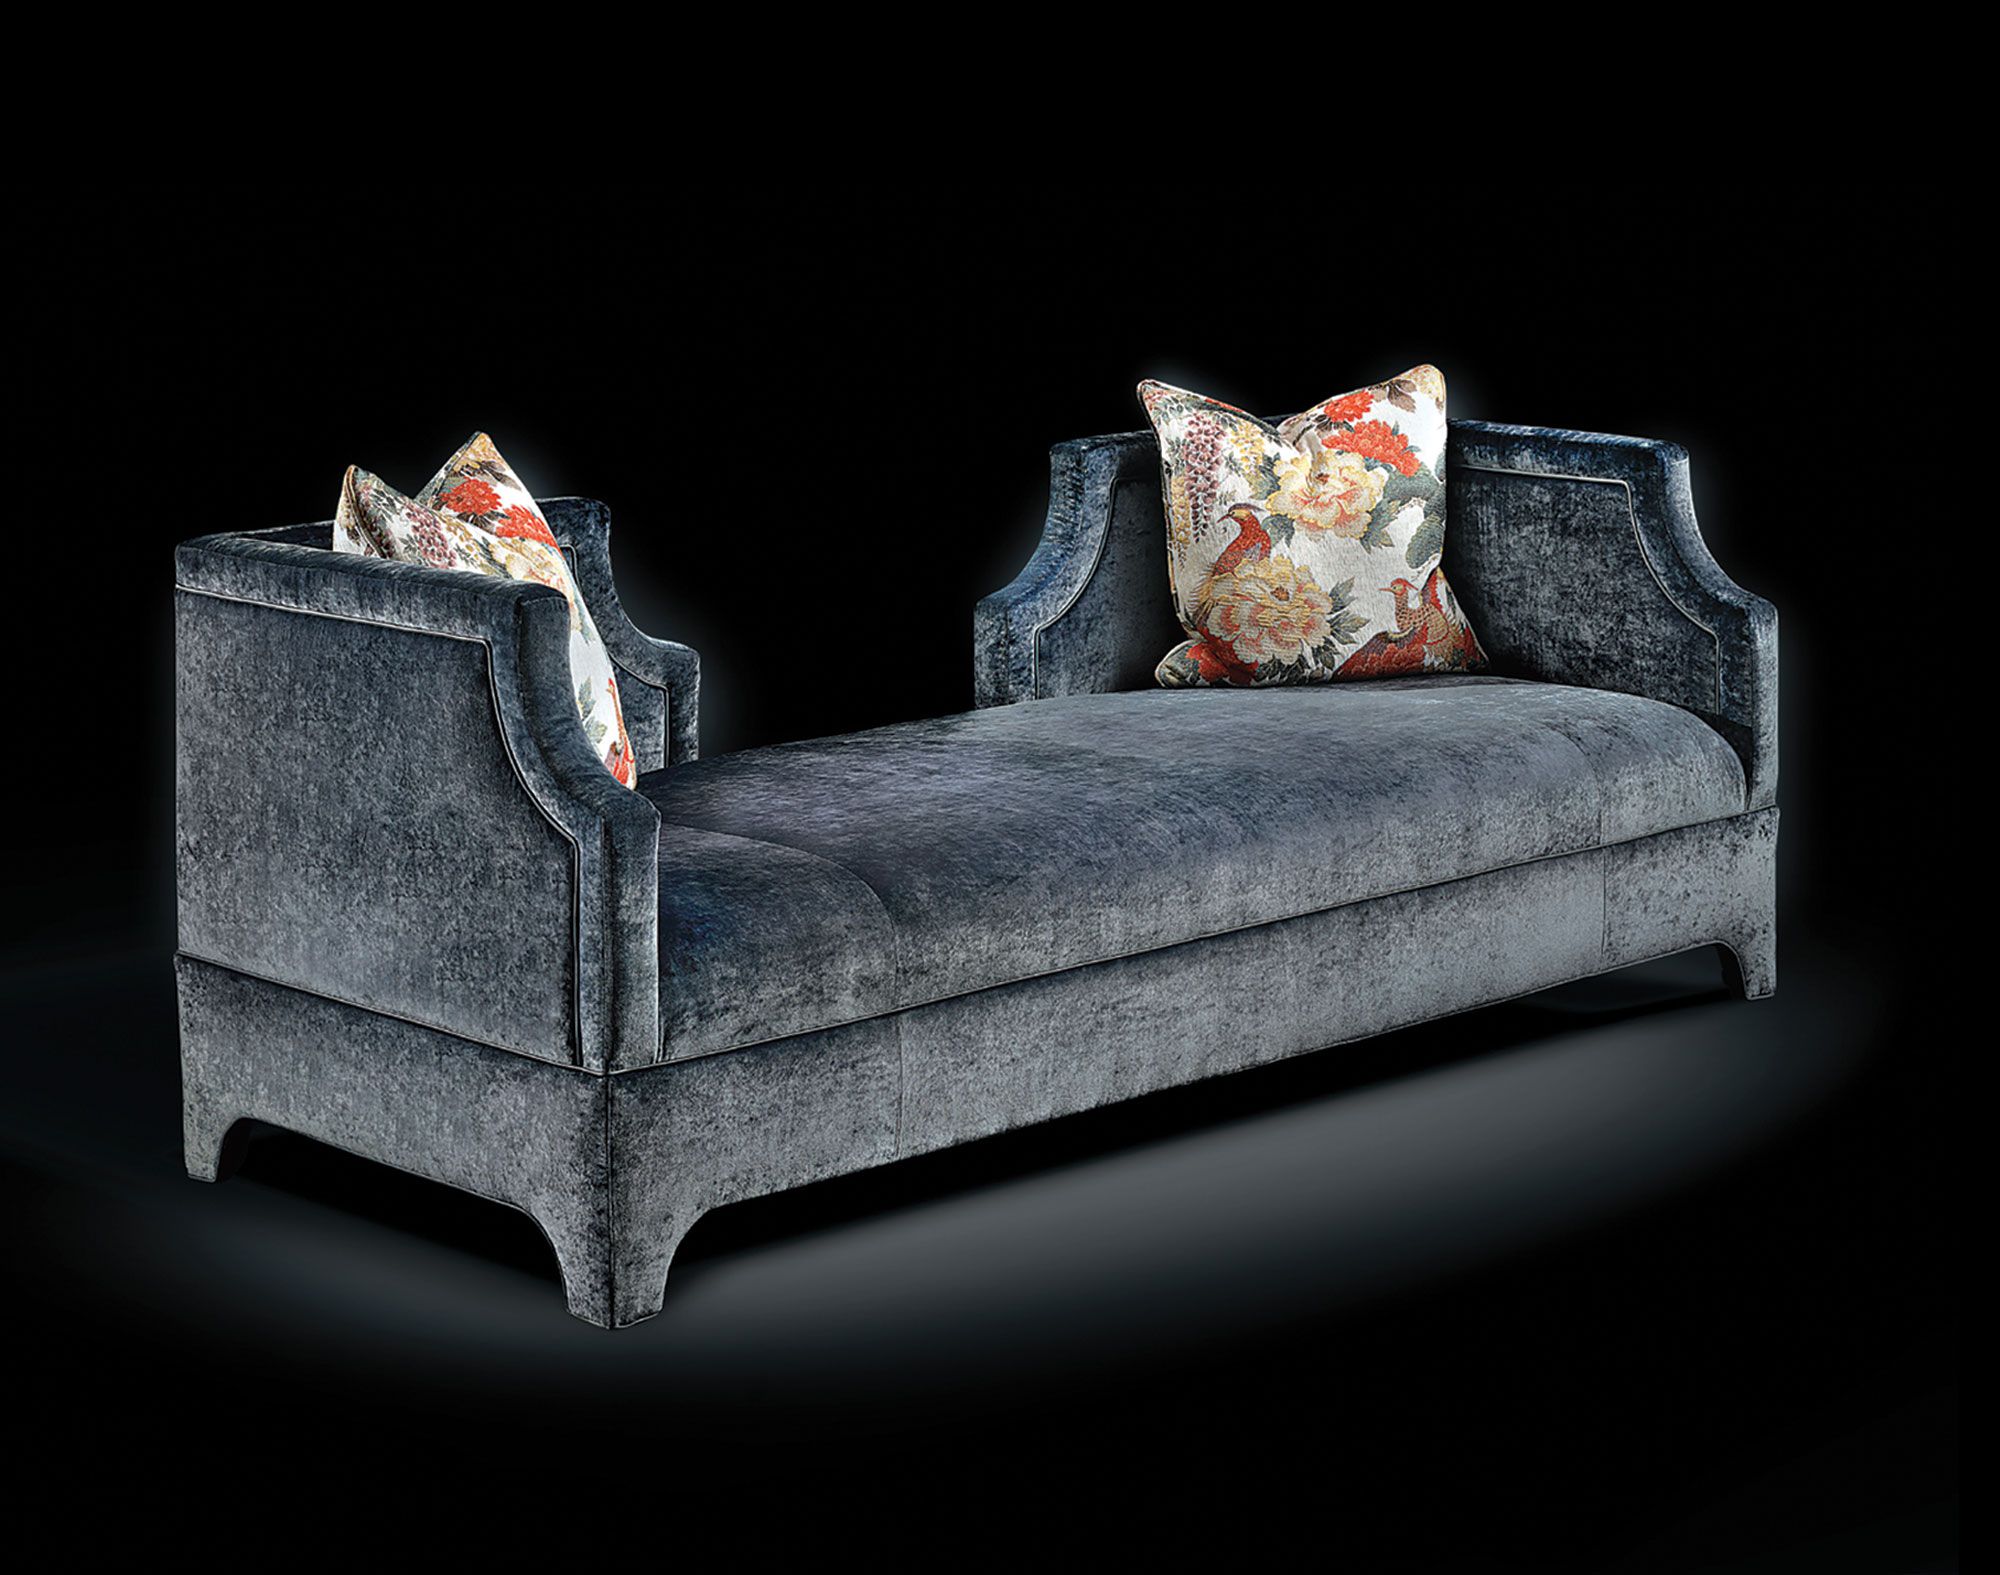 Showroom Catalog Front Cover Featuring a Blueish Gray Microvelvet Sofa